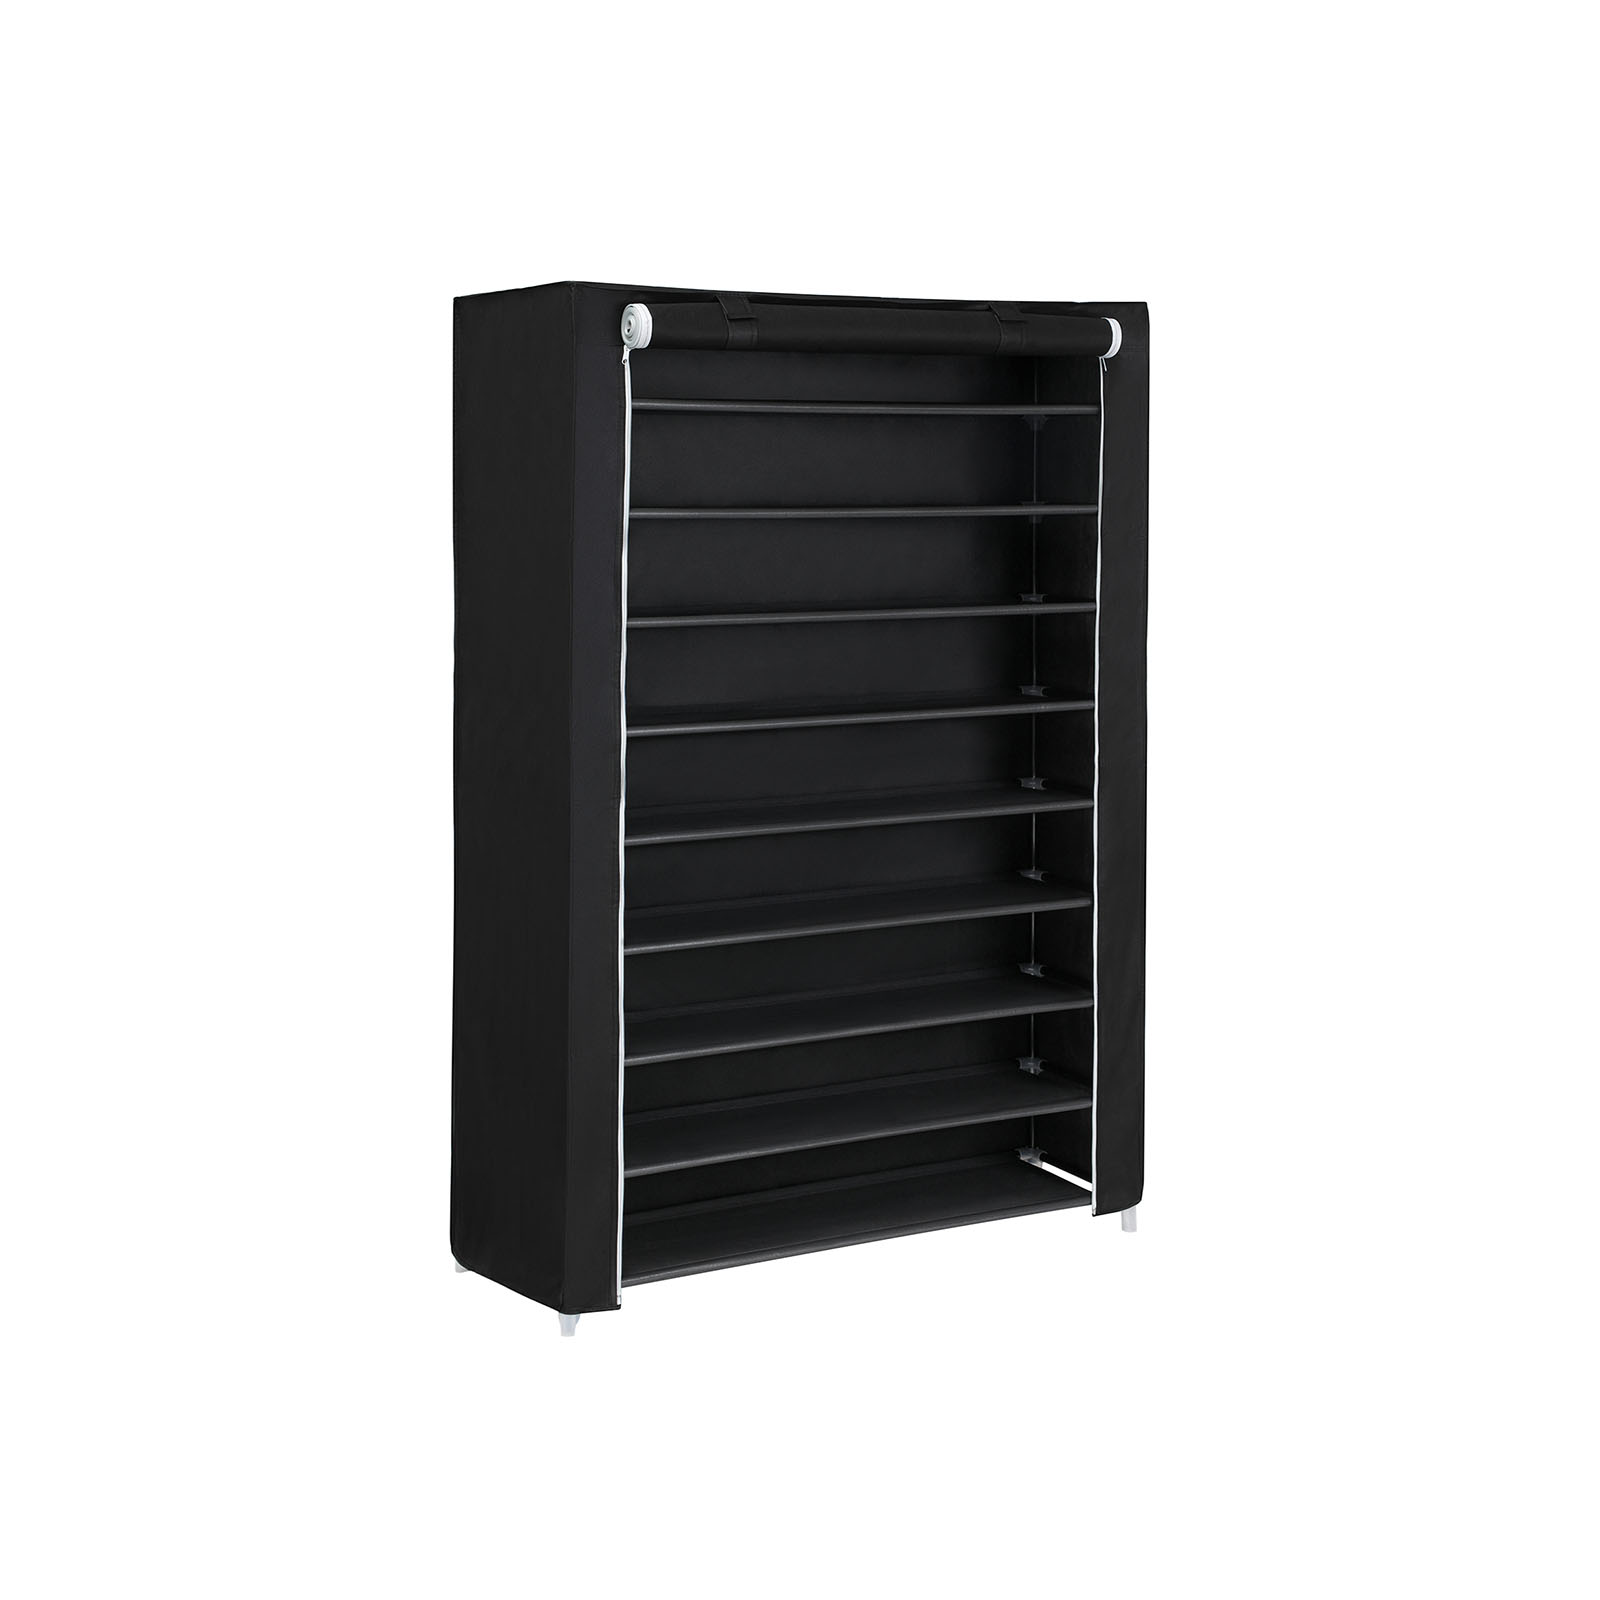 SONGMICS 10 Tier Shoe Rack Cabinet for 27 pairs of shoes Standing Storage Organizer 58 x 28 x 160 cm Black RXJ10H 